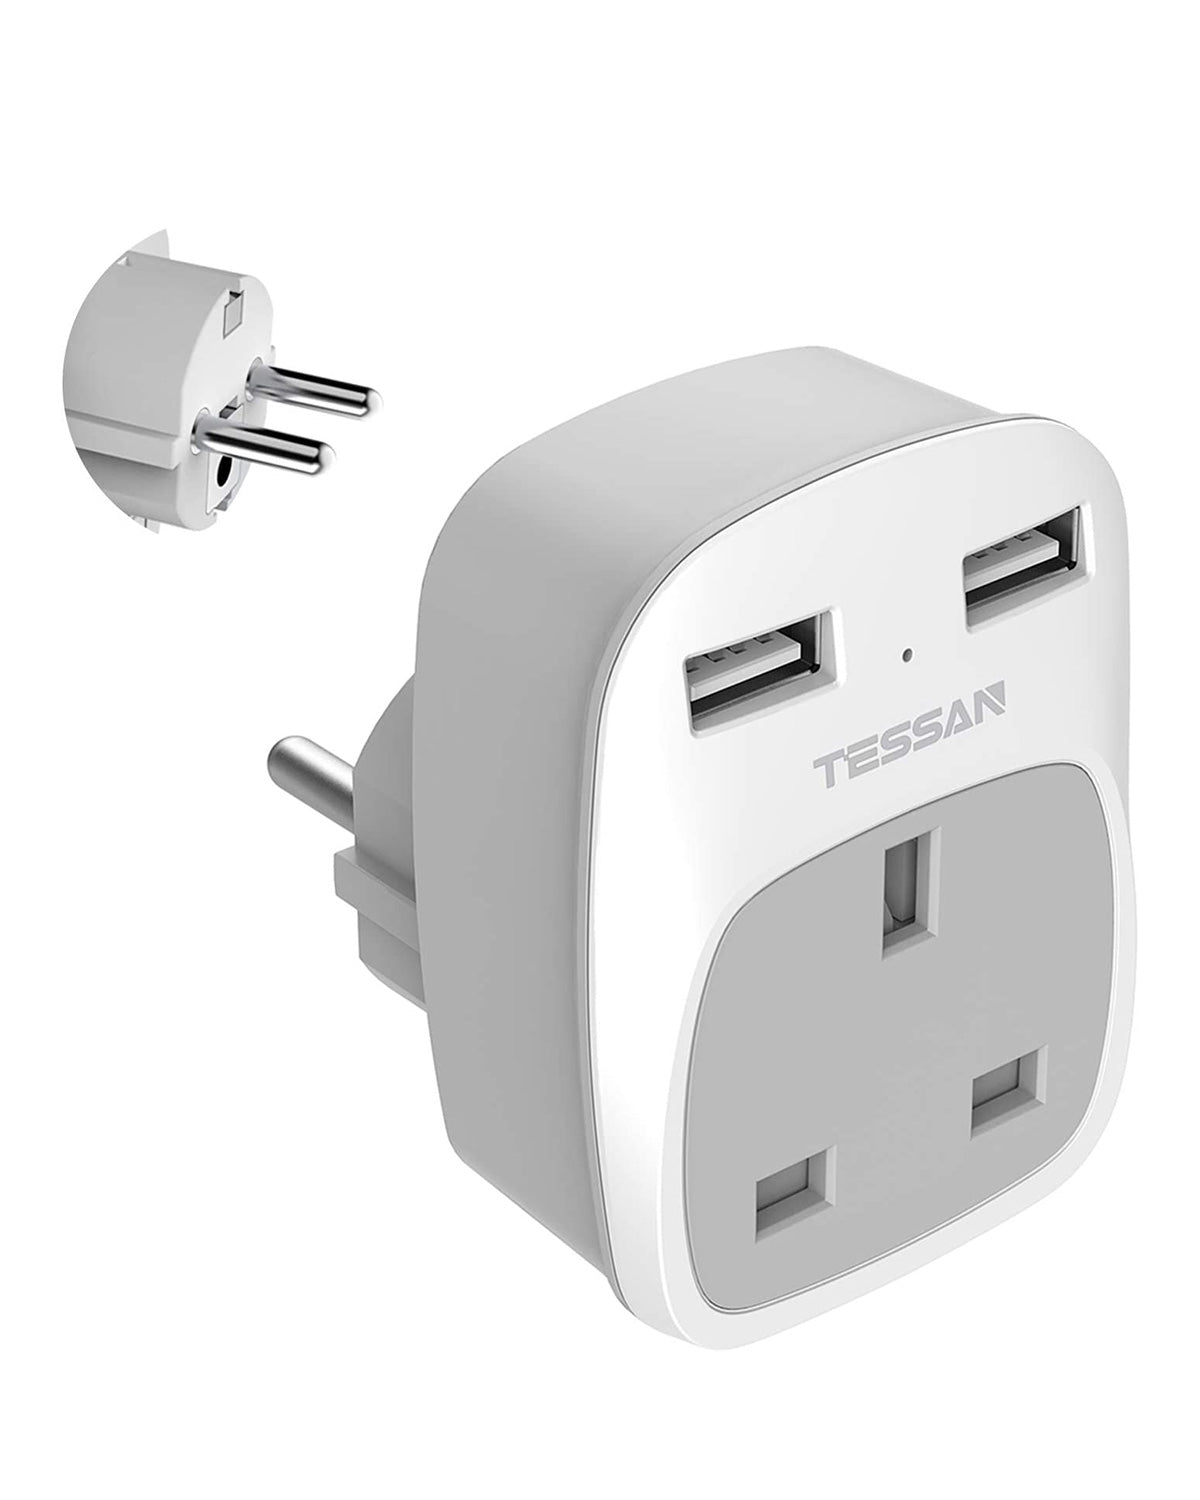 UK to European Travel Adapter with 2 USB Ports